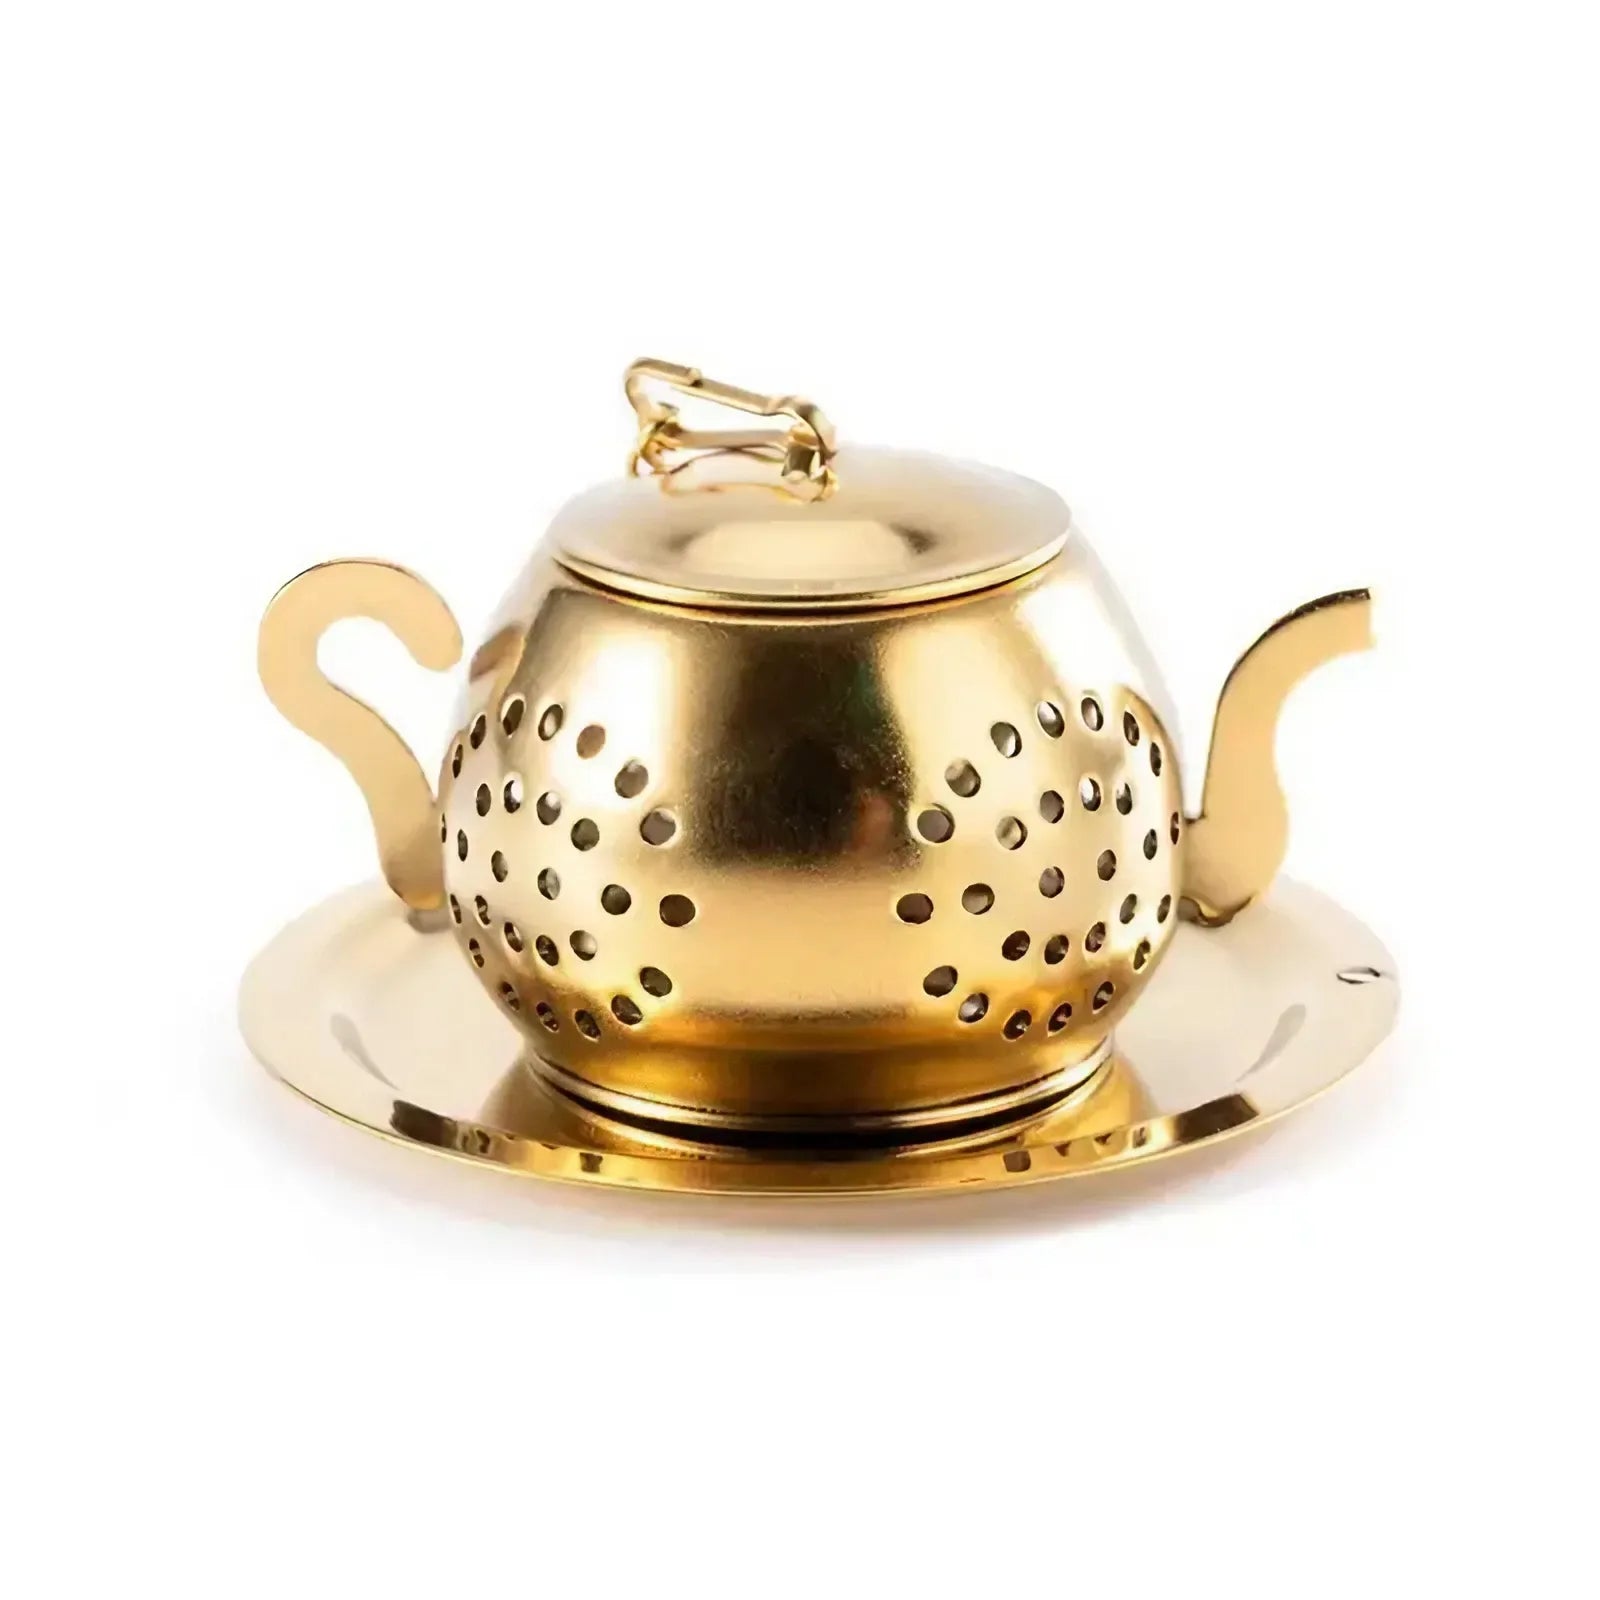 Gold Stainless Steel Loose Leaf Tea Infuser Teapot Ball with Chain and Drip Tray mi maiv